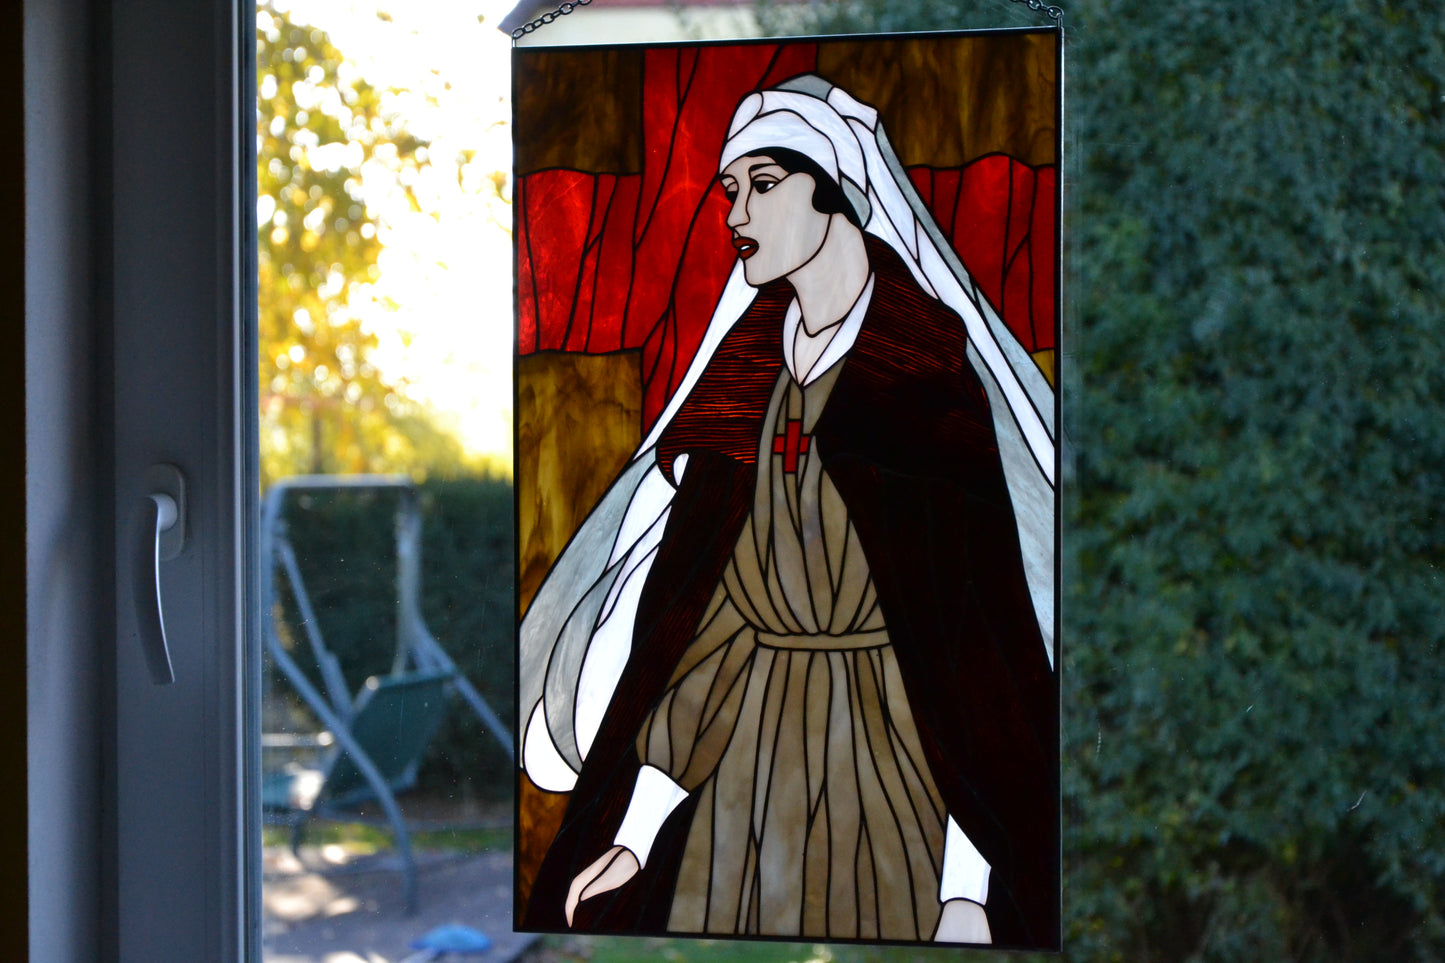 Stained glass panel Wall decor Nurse from the cover of Vogue magazine Stain glass suncatcher Red cross Stained glass portrait Xmas gift